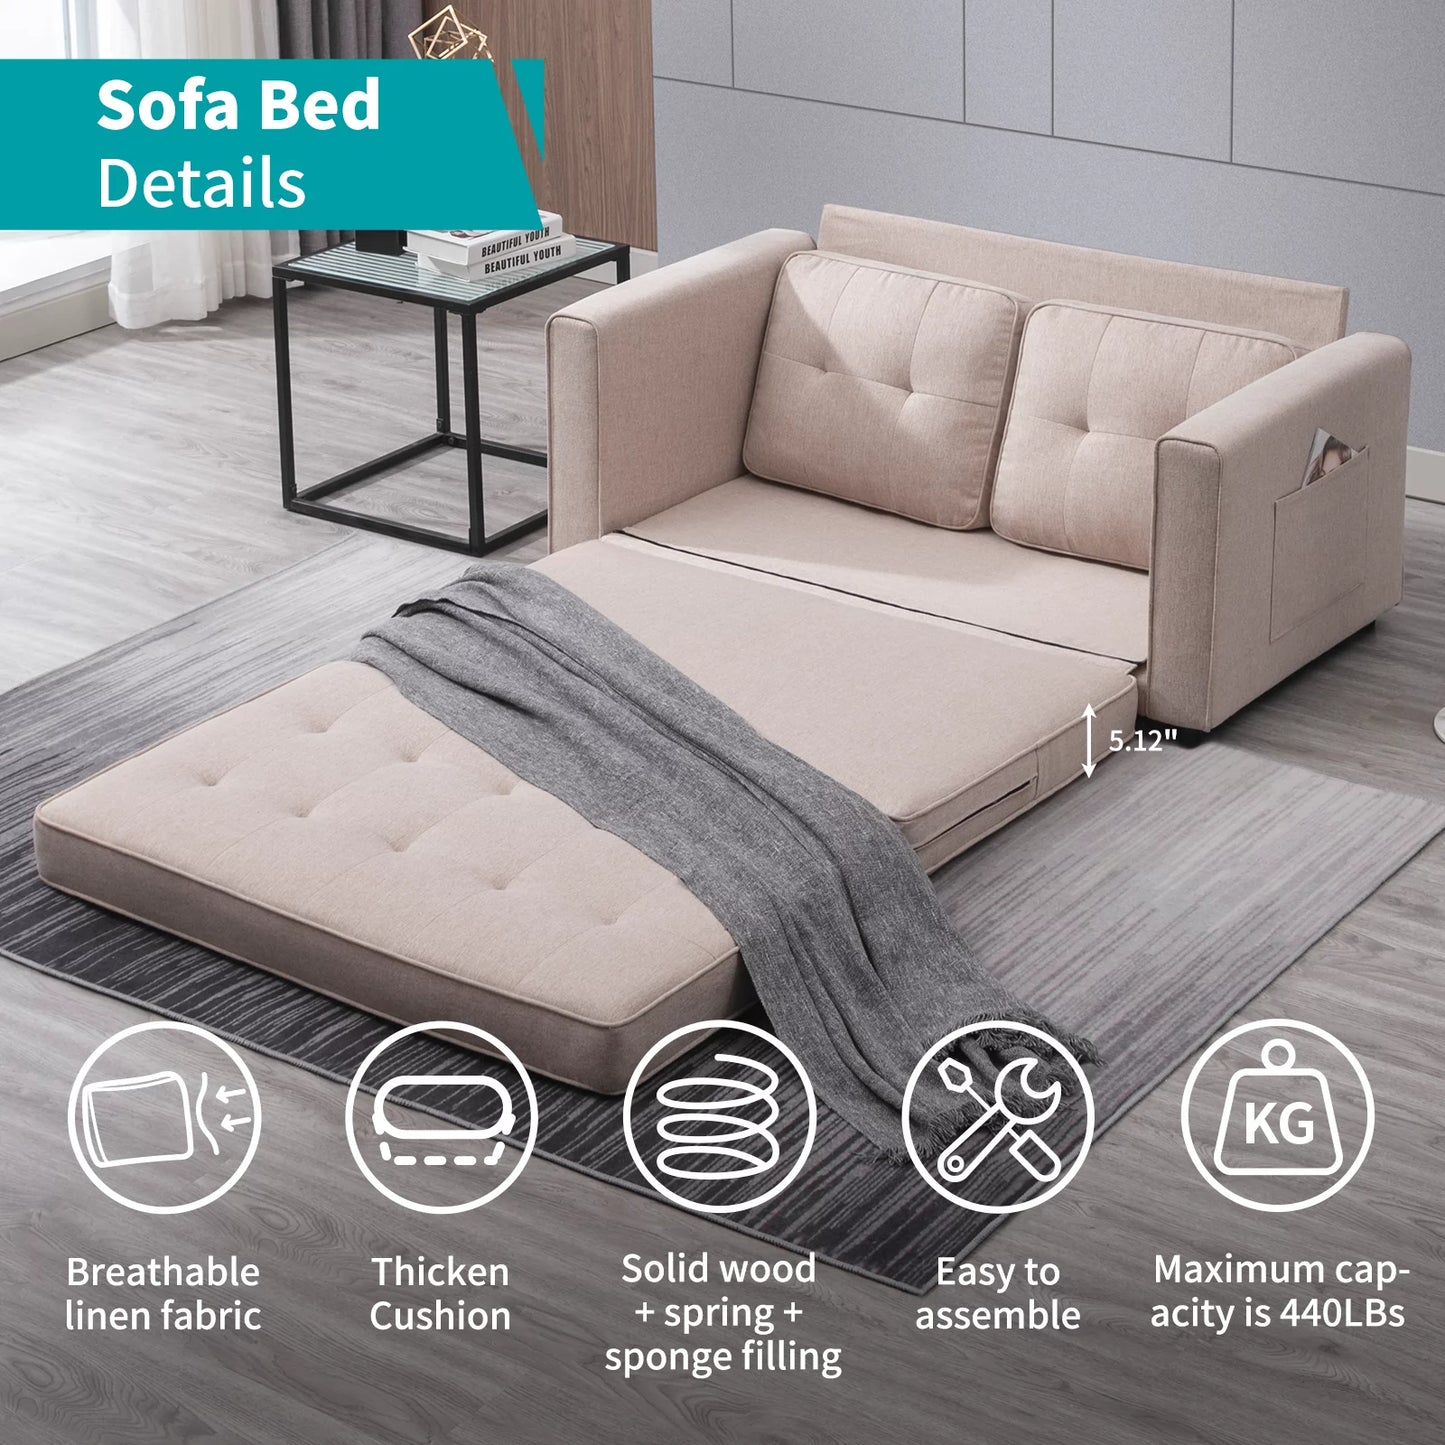 BALUS Sofa Bed, Upholstered Love-seat Couch,futon sofa sleeper, Living room Furniture sofa couch, Pull out sofa bed, Convertible Folding sofa for Living Room, Apartment, Light Grey